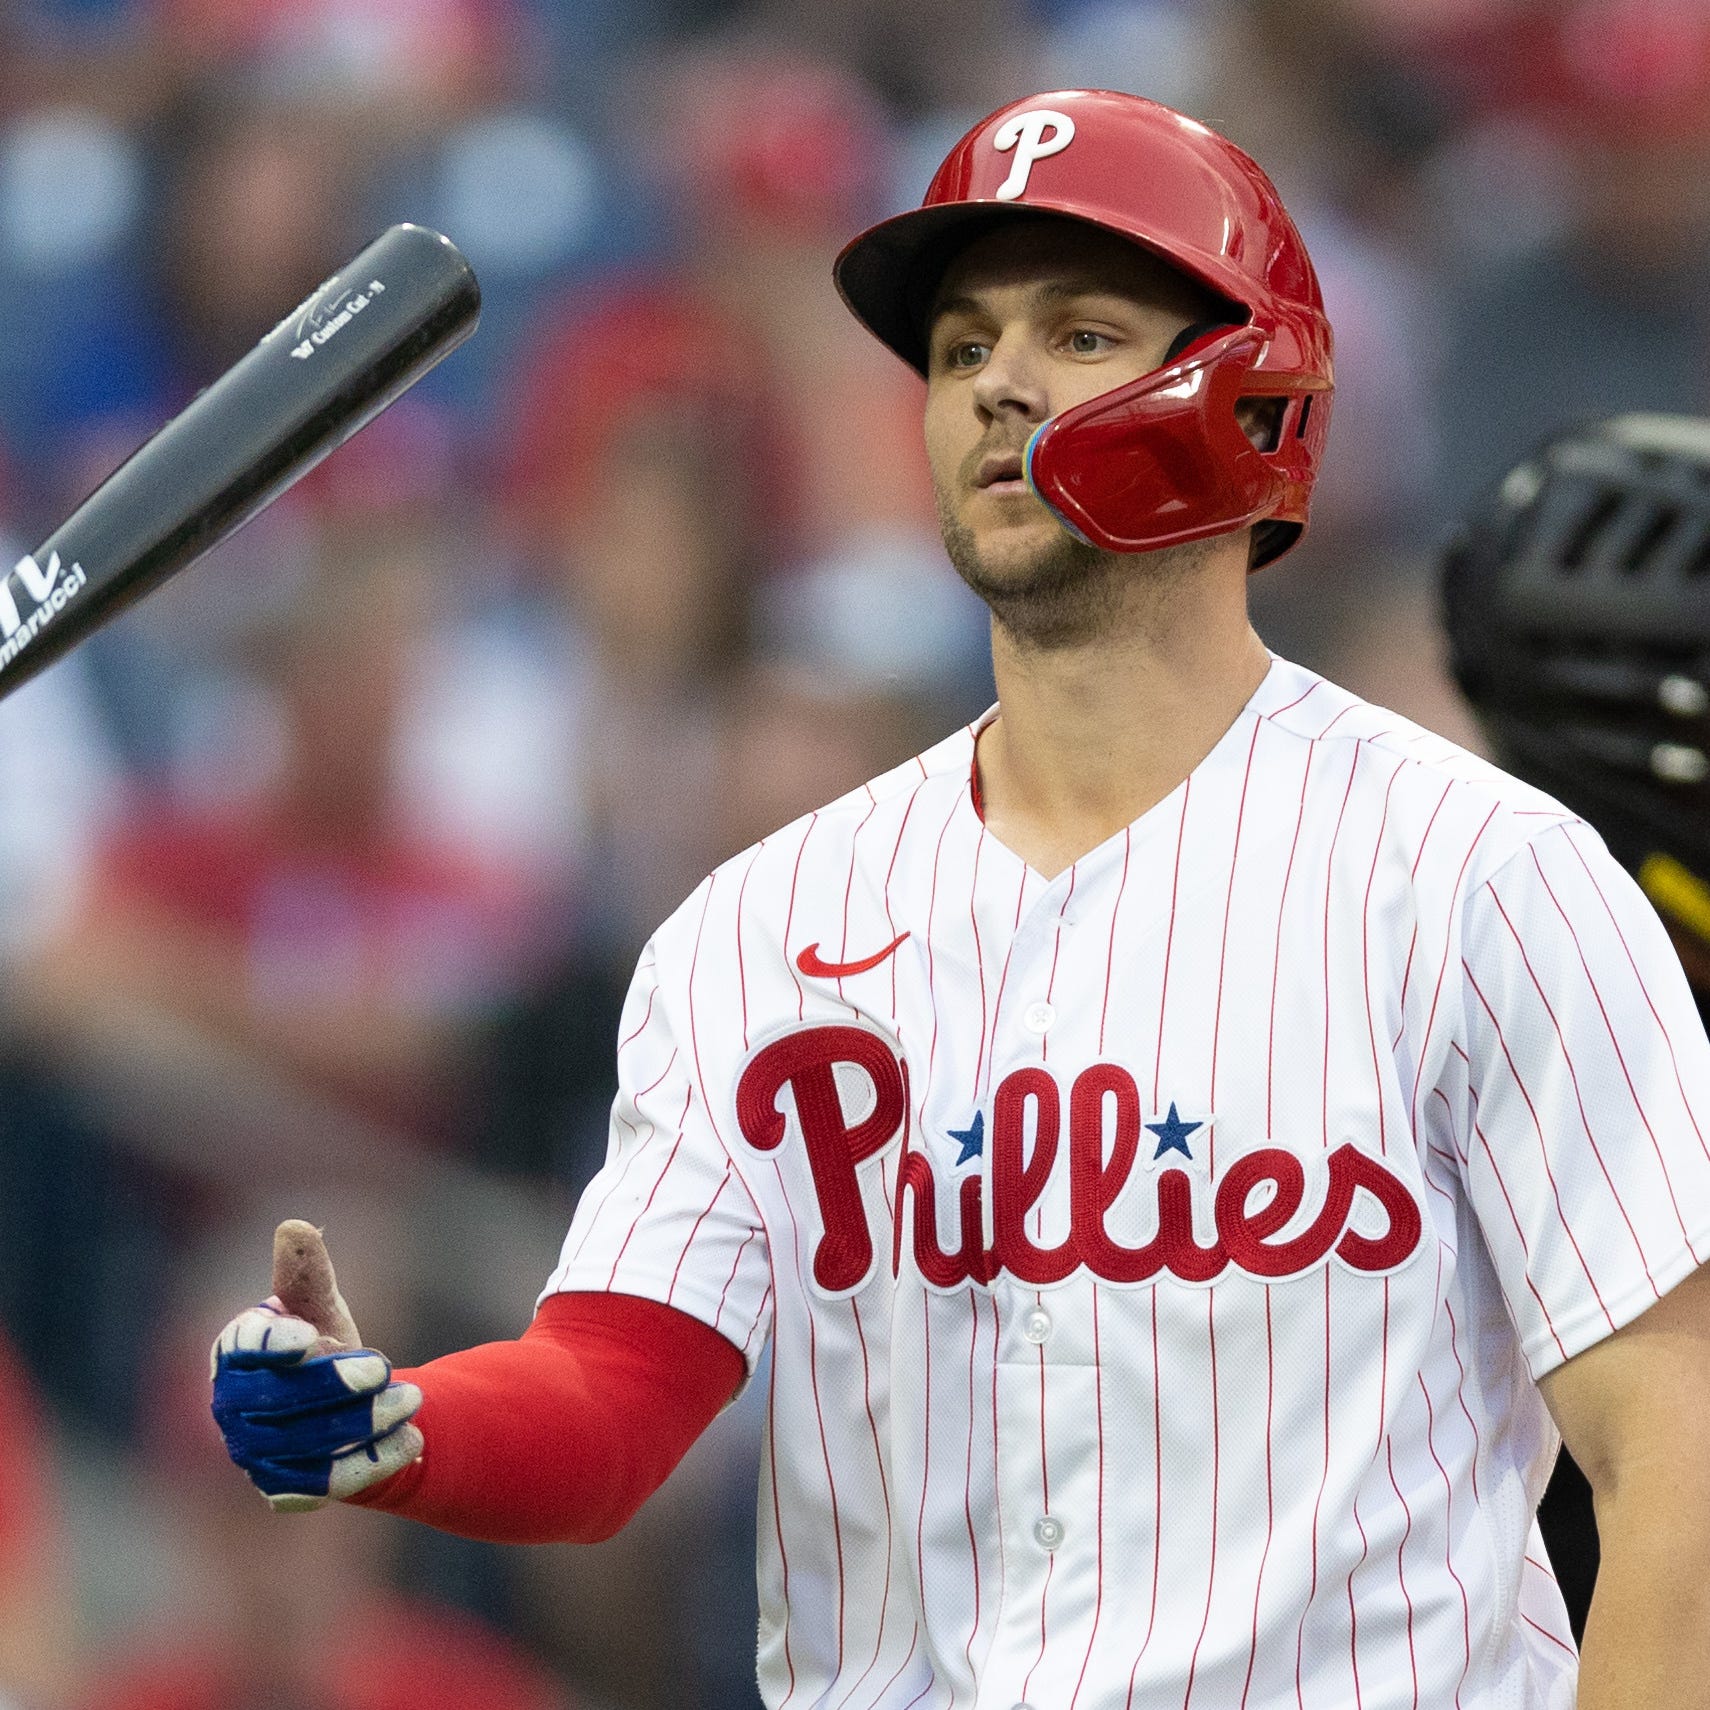 Trea Turner flips his bat after striking out in the first inning in Monday's game against the Diamondbacks. In the first year of an 11-year, $300 million contract, Turner is hitting .256/.303/390 with four home runs and six stolen bases in 46 games.